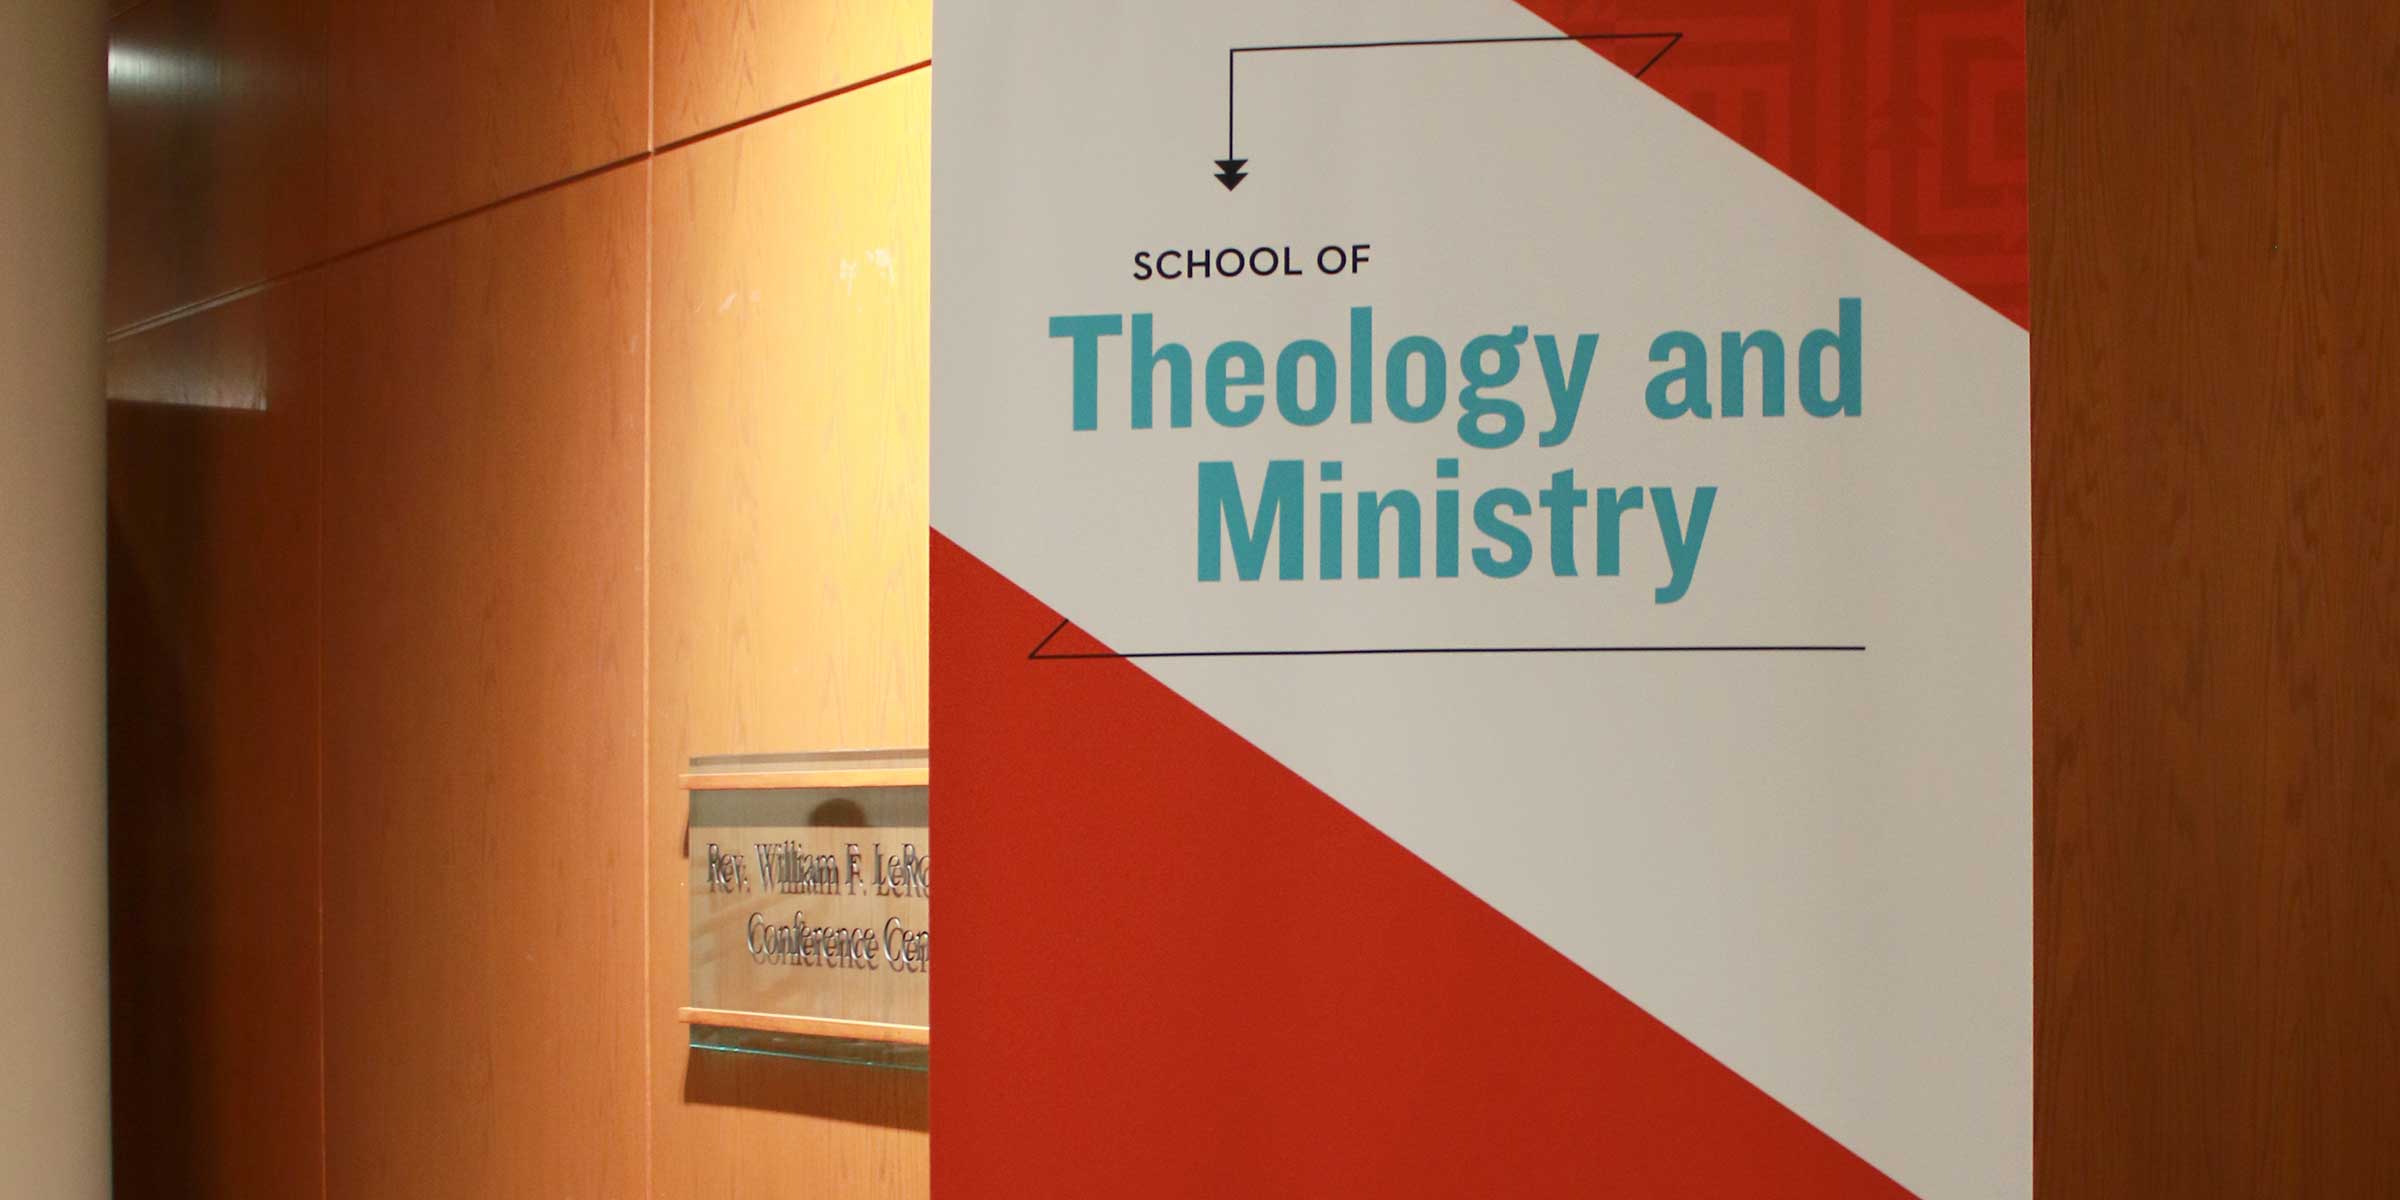 School of Theology and Ministry